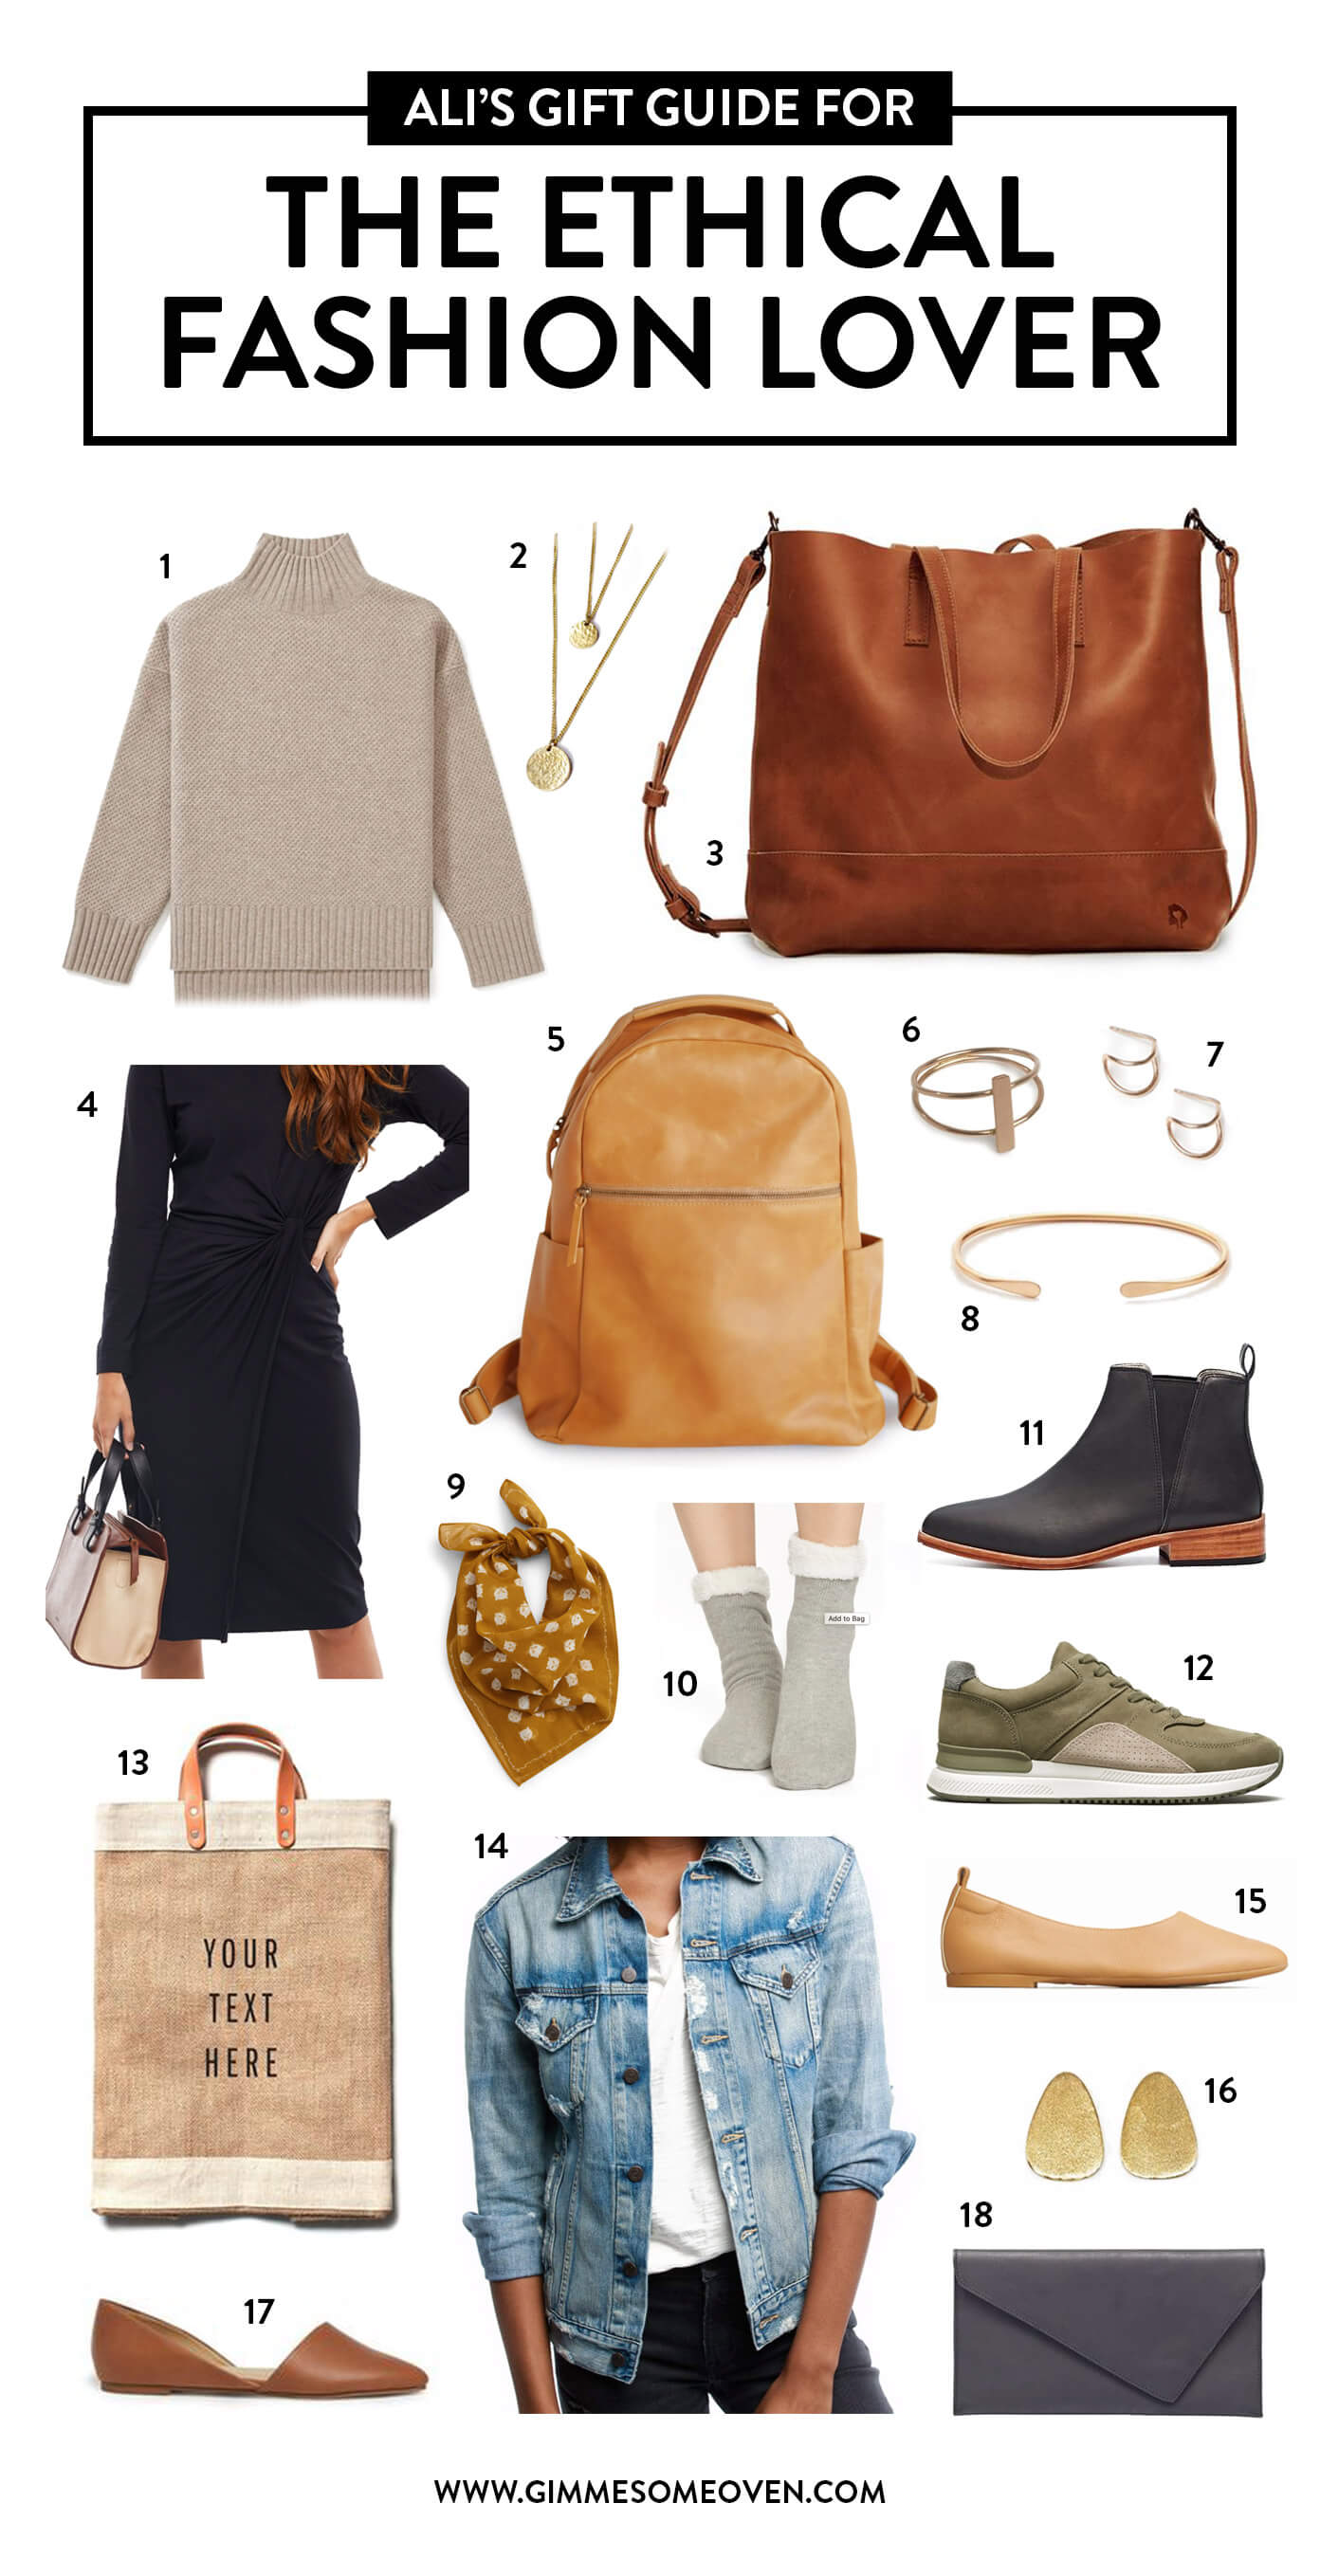 Gift Guide for the Ethical Fashion Lover